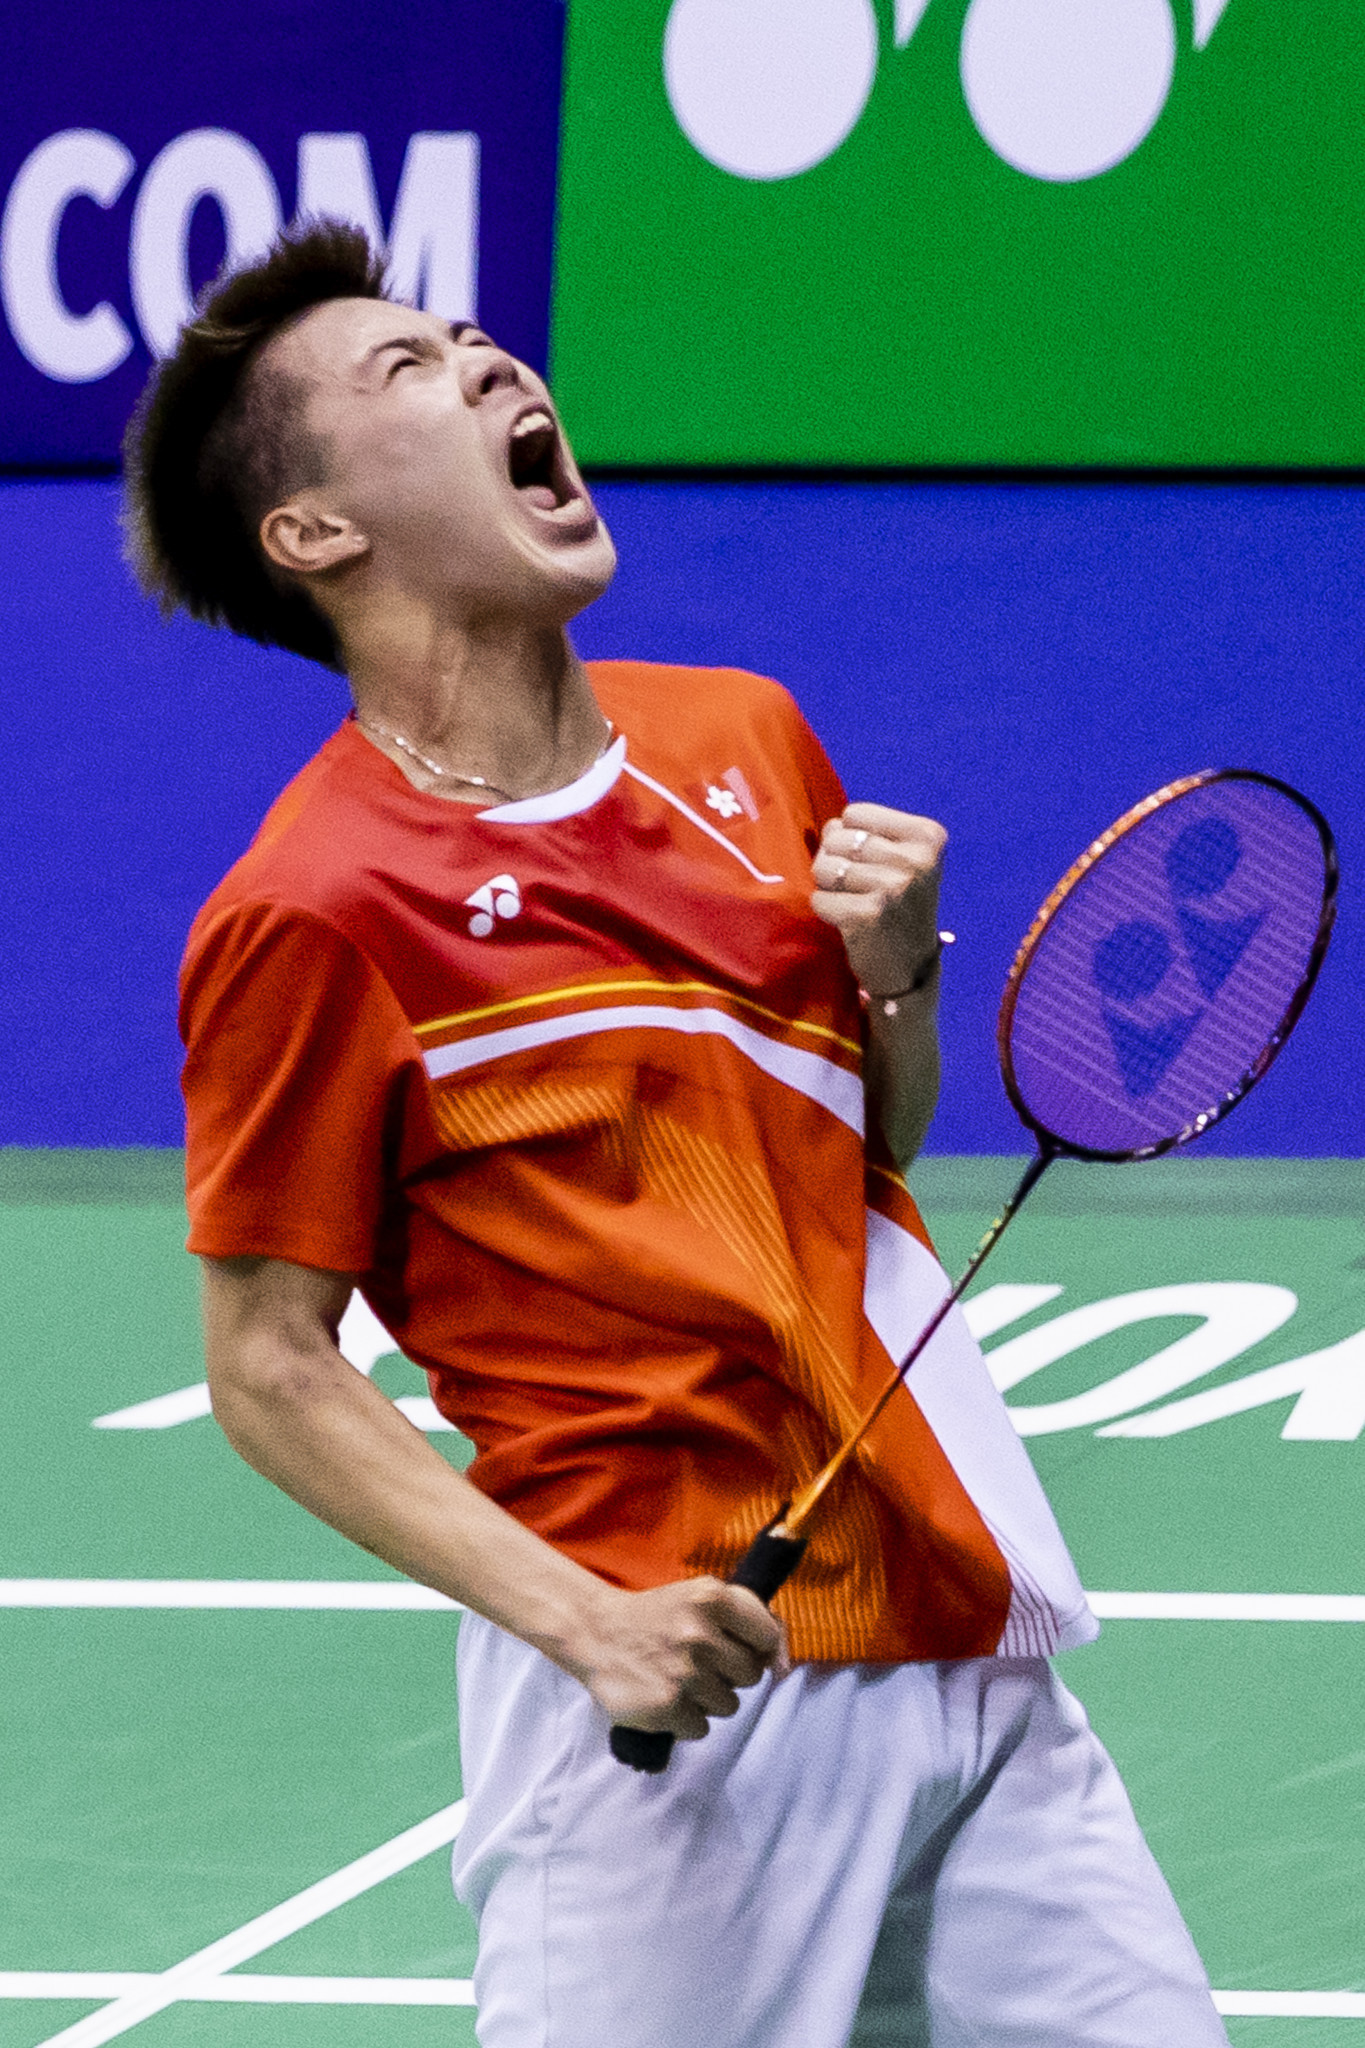 Home hero claims fairytale victory at BWF Hong Kong Open 